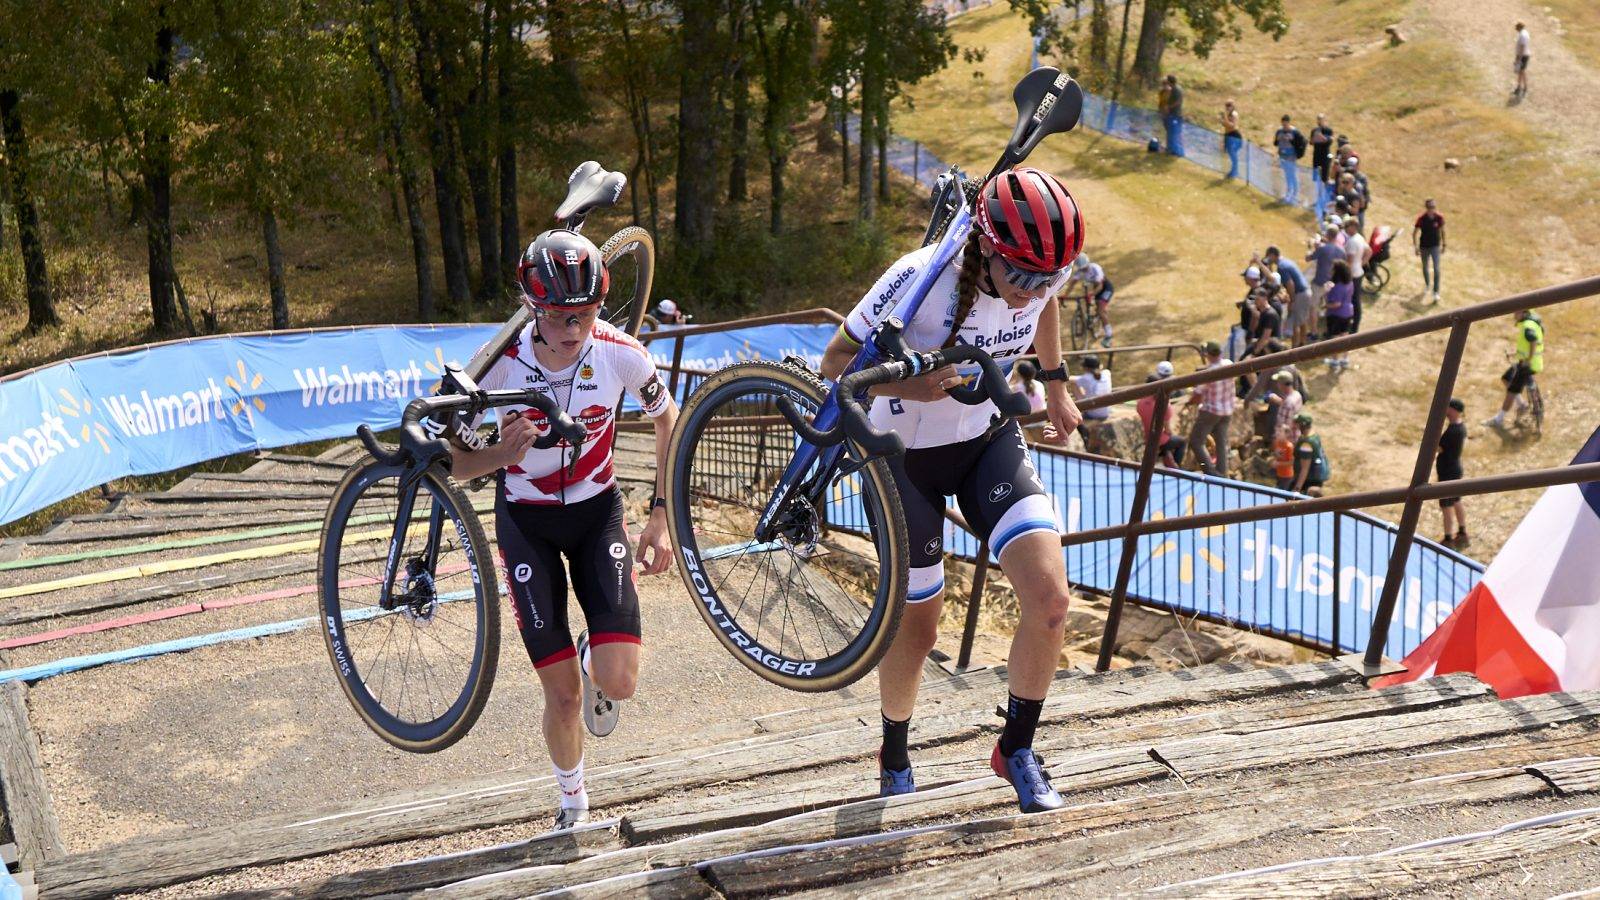 Dutch Fem Van Empel (L) and Dutch Lucinda Brand pictured in action during the second stage (2/14) of the UCI World Cup Cyclocross competition in Fayetteville, Arkansas, USA, Sunday 16 October 2022.
BELGA PHOTO BILL SCHIEKEN